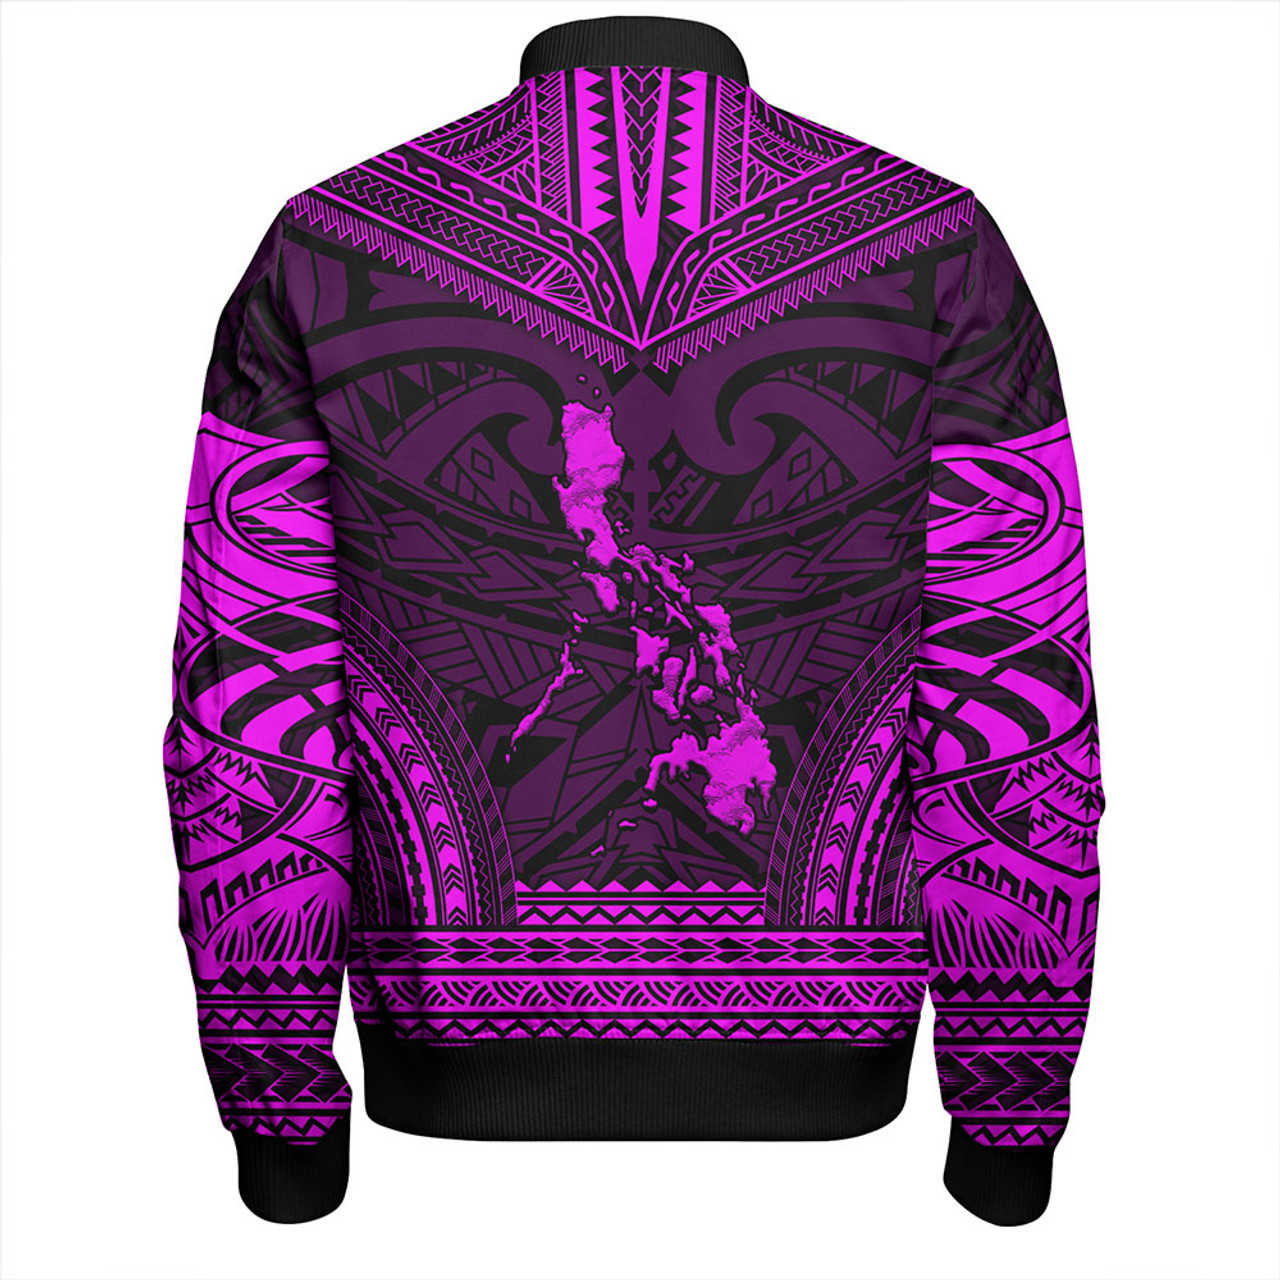 Philippines Bomber Jacket - Philippines Cheif Tattoo Patterns Style